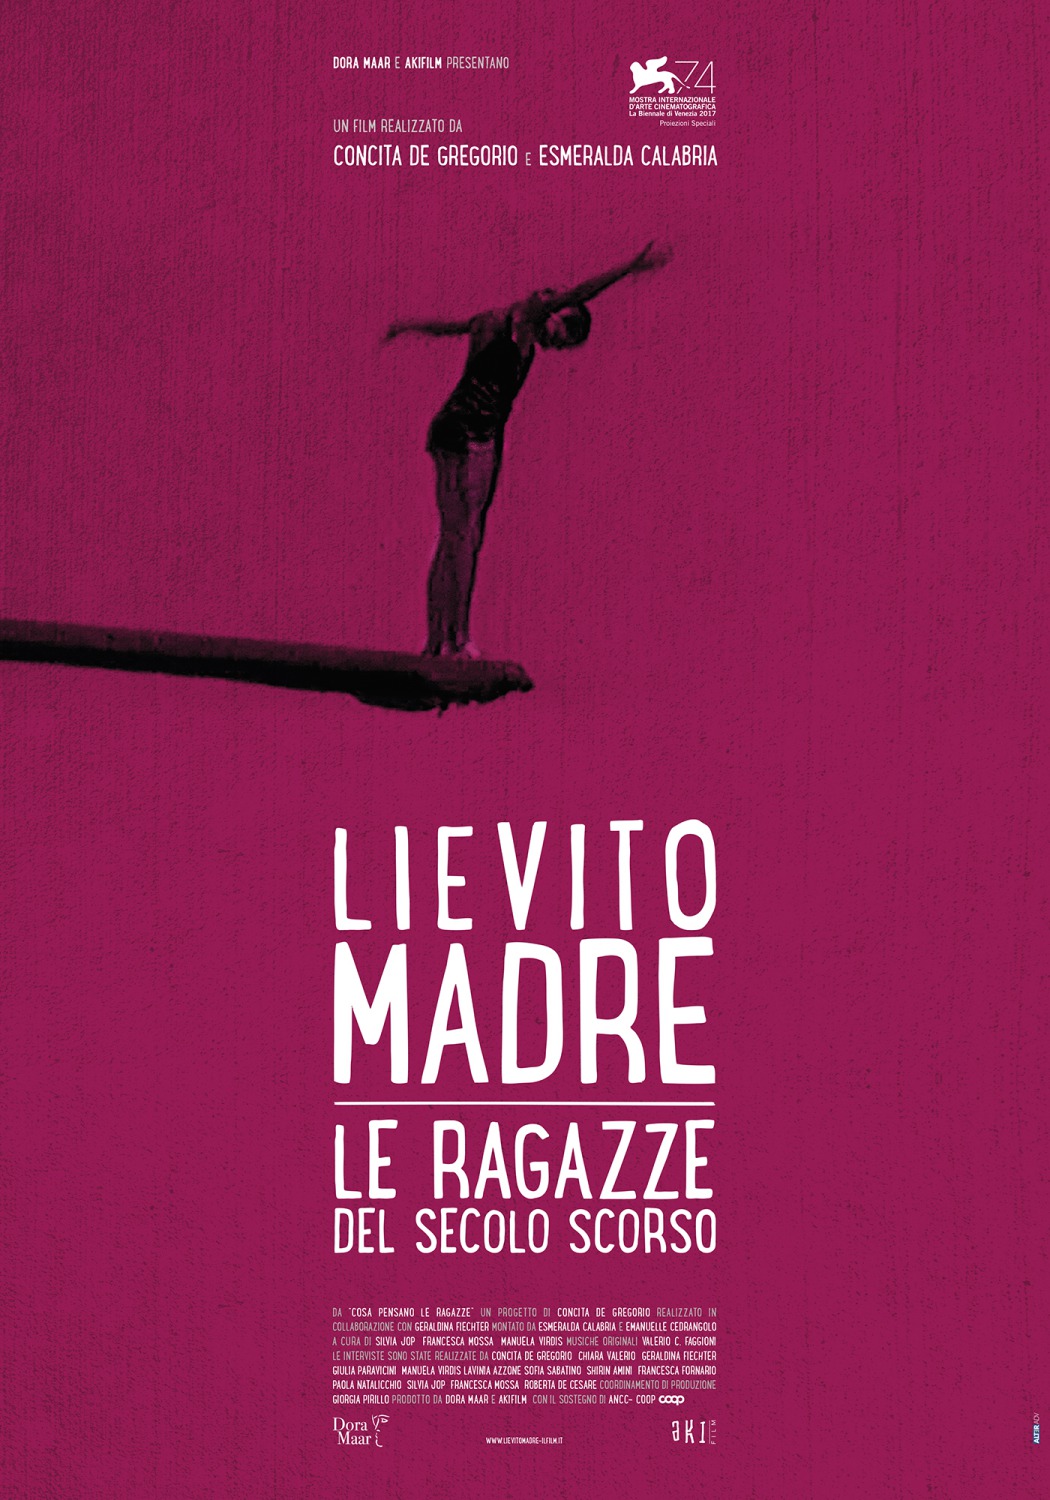 Extra Large Movie Poster Image for Lievito madre 